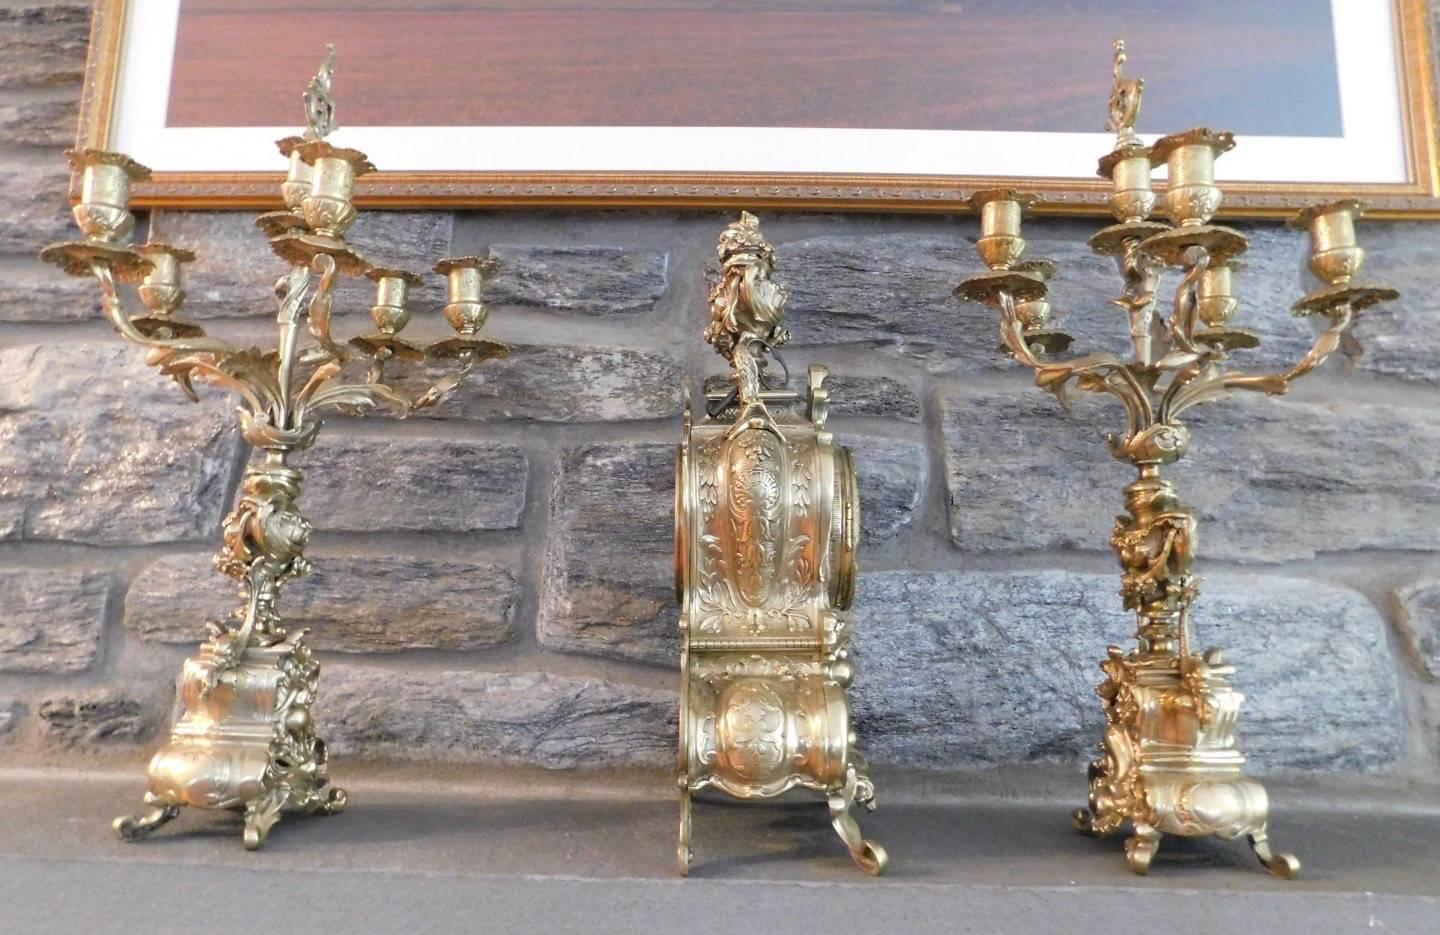 19th century French brass Garniture clock set with candelabras in excellent condition
Clock works
Clock measures in inches: 9 W x 18 H x 5 D
Candelabra measures in inches: 13 D x 23.5 H.